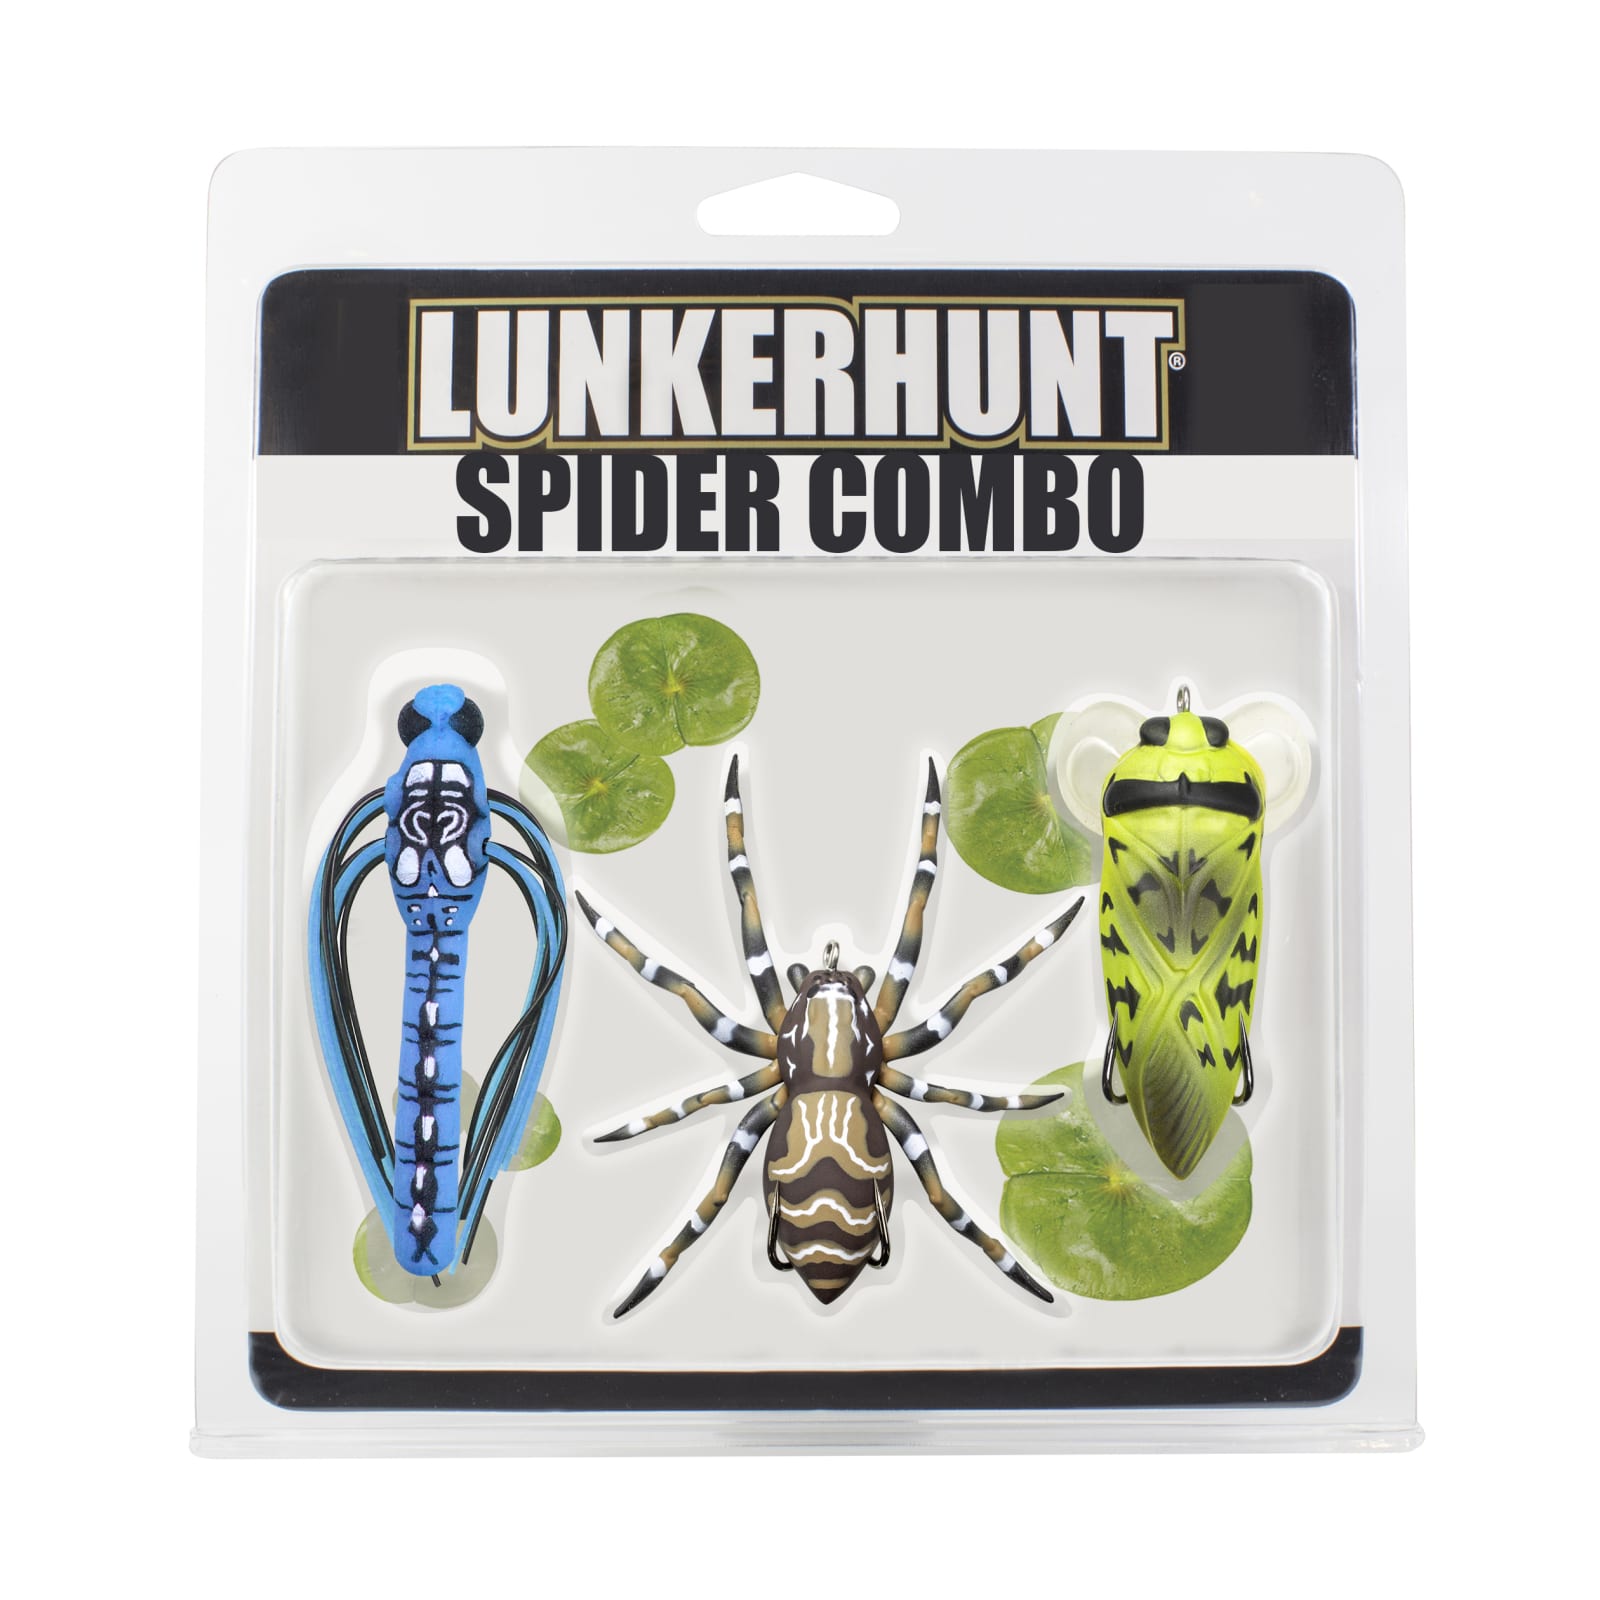 Topwater Surface Bait Combo - Assorted by Lunkerhunt at Fleet Farm